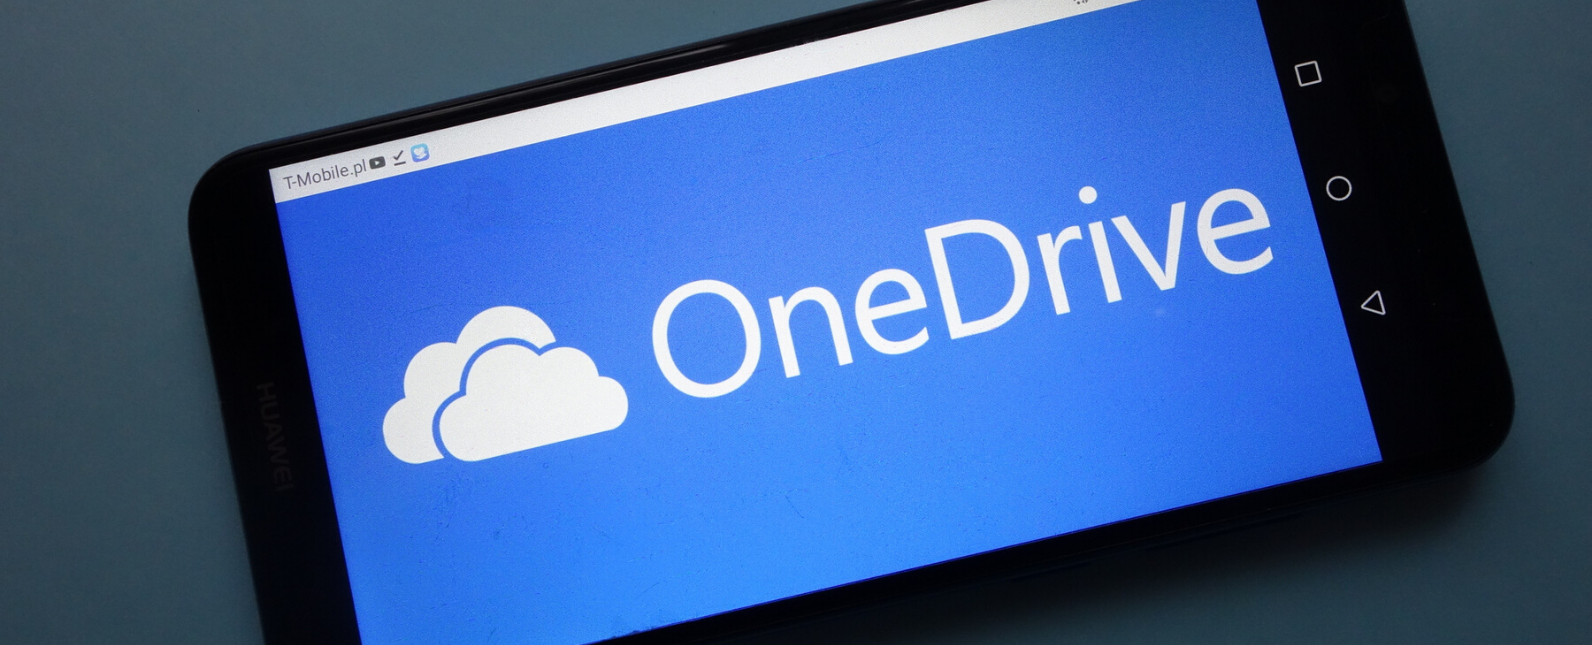 onedrive for business app